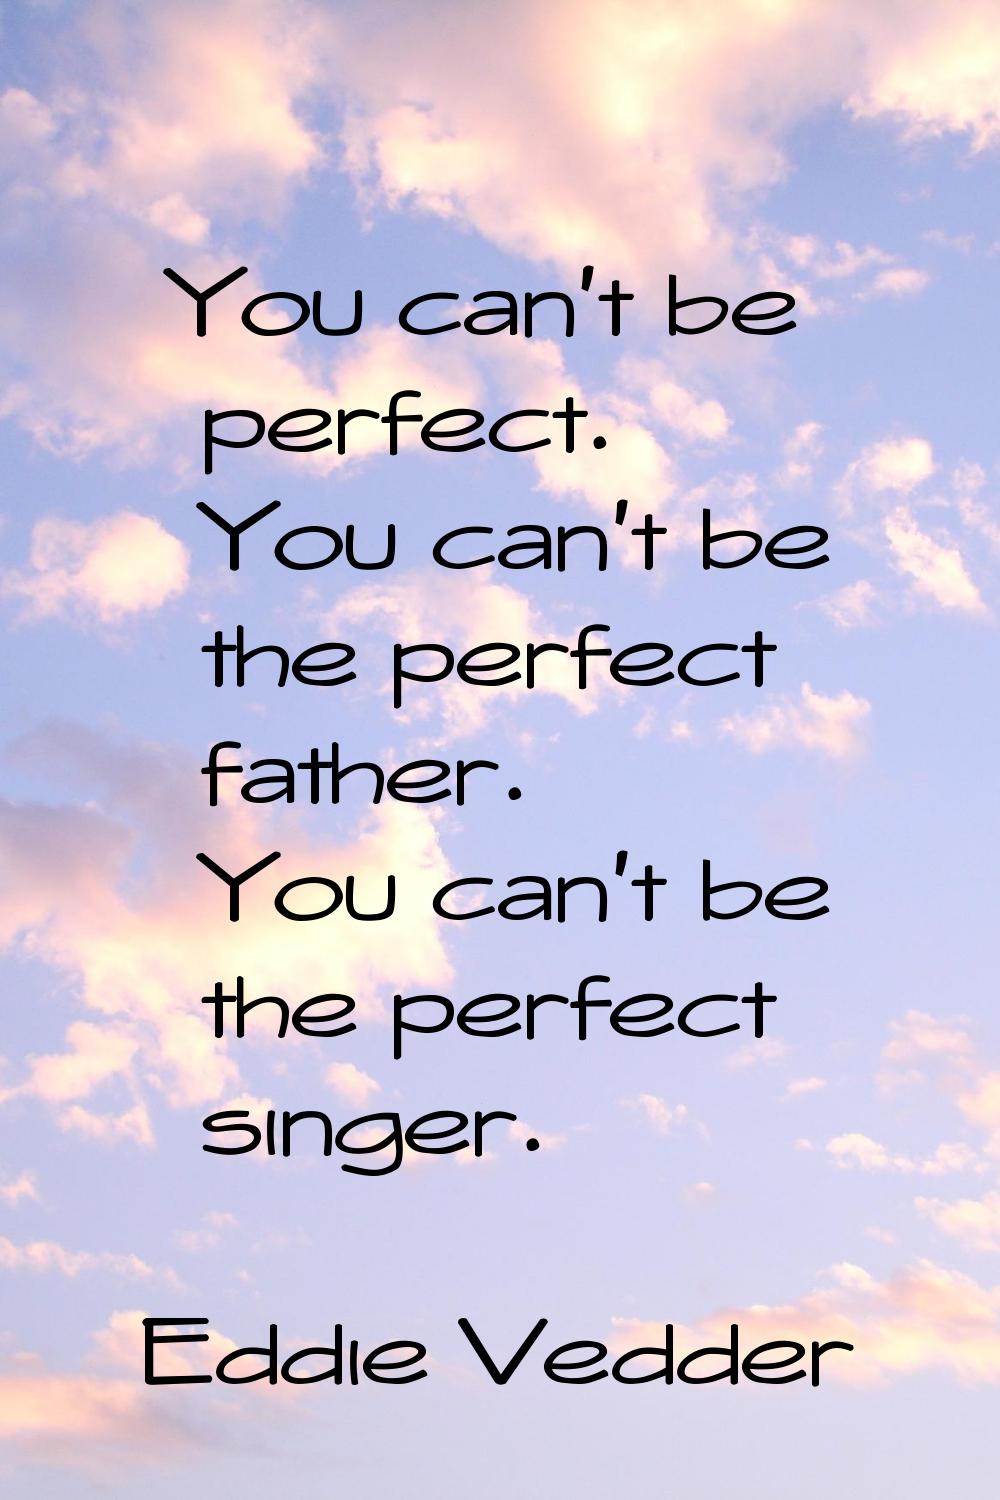 You can't be perfect. You can't be the perfect father. You can't be the perfect singer.